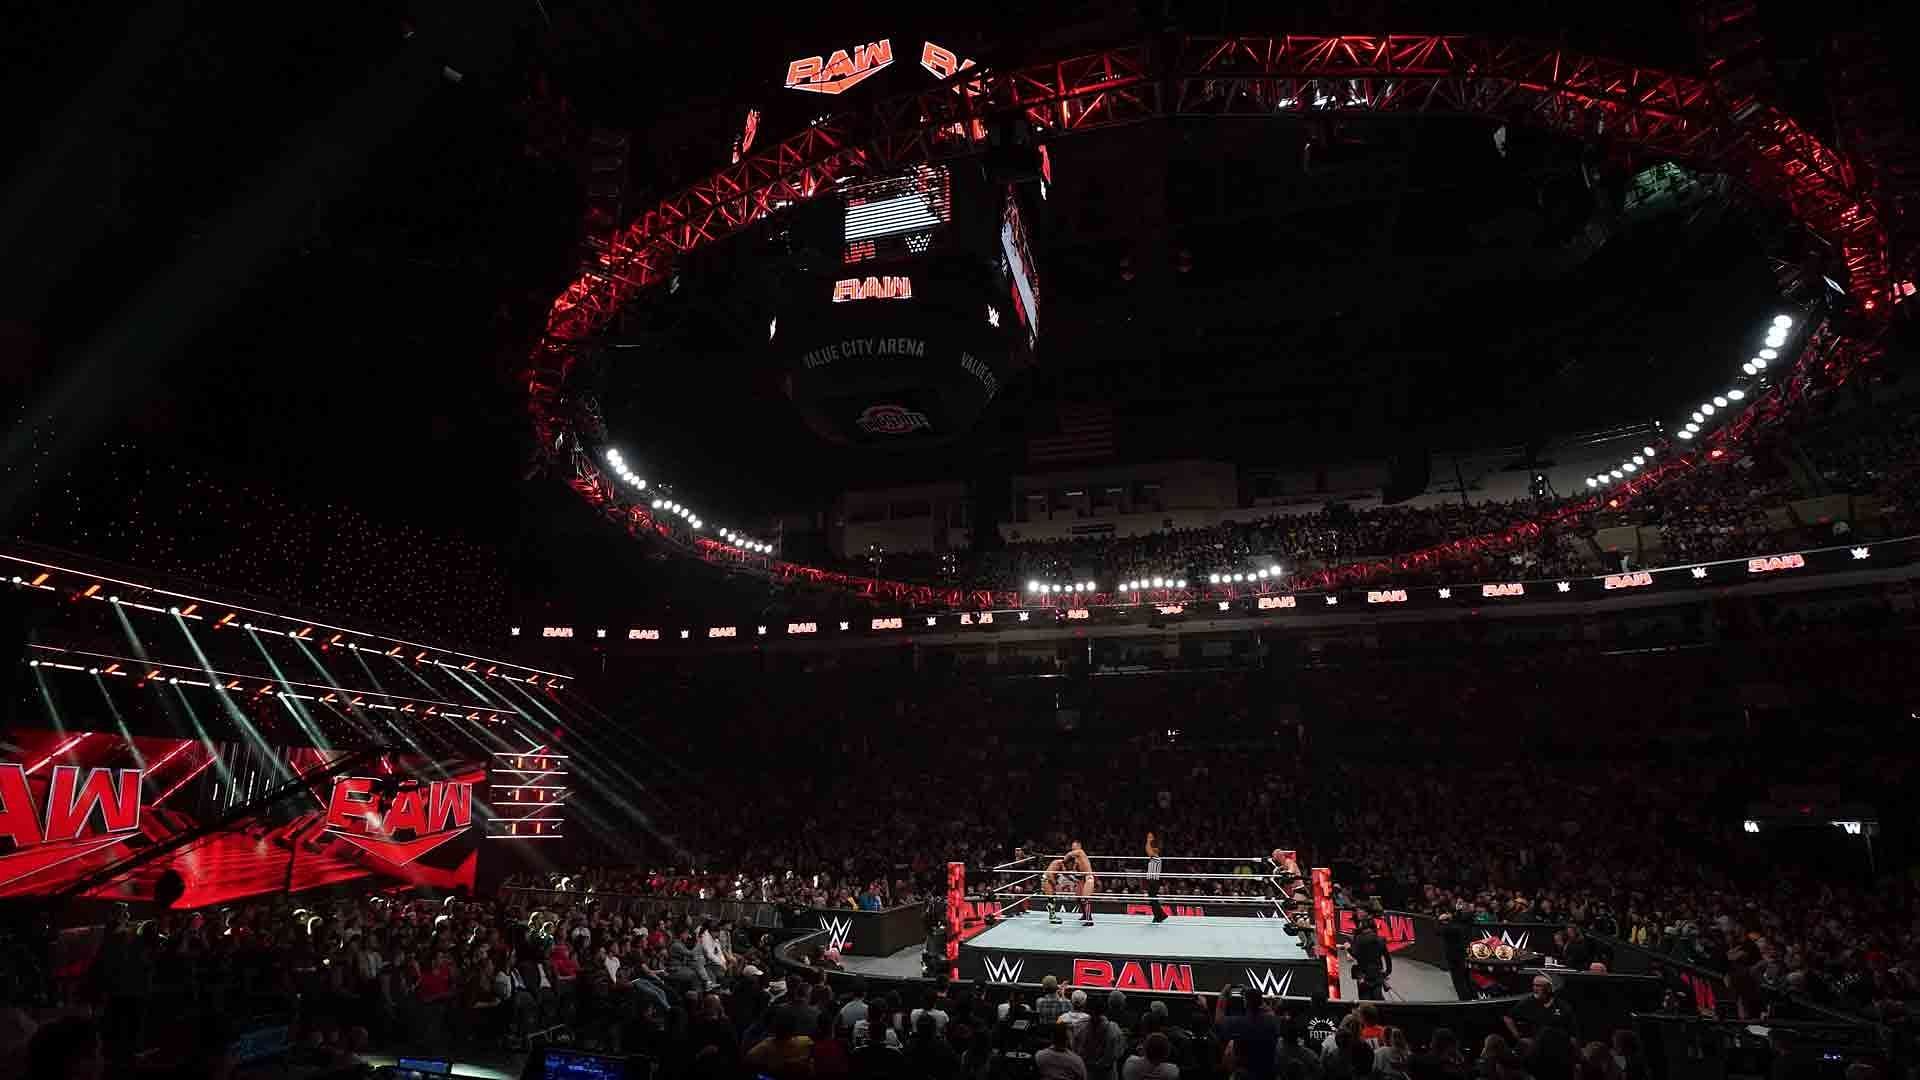 The WWE Universe packs arena for RAW